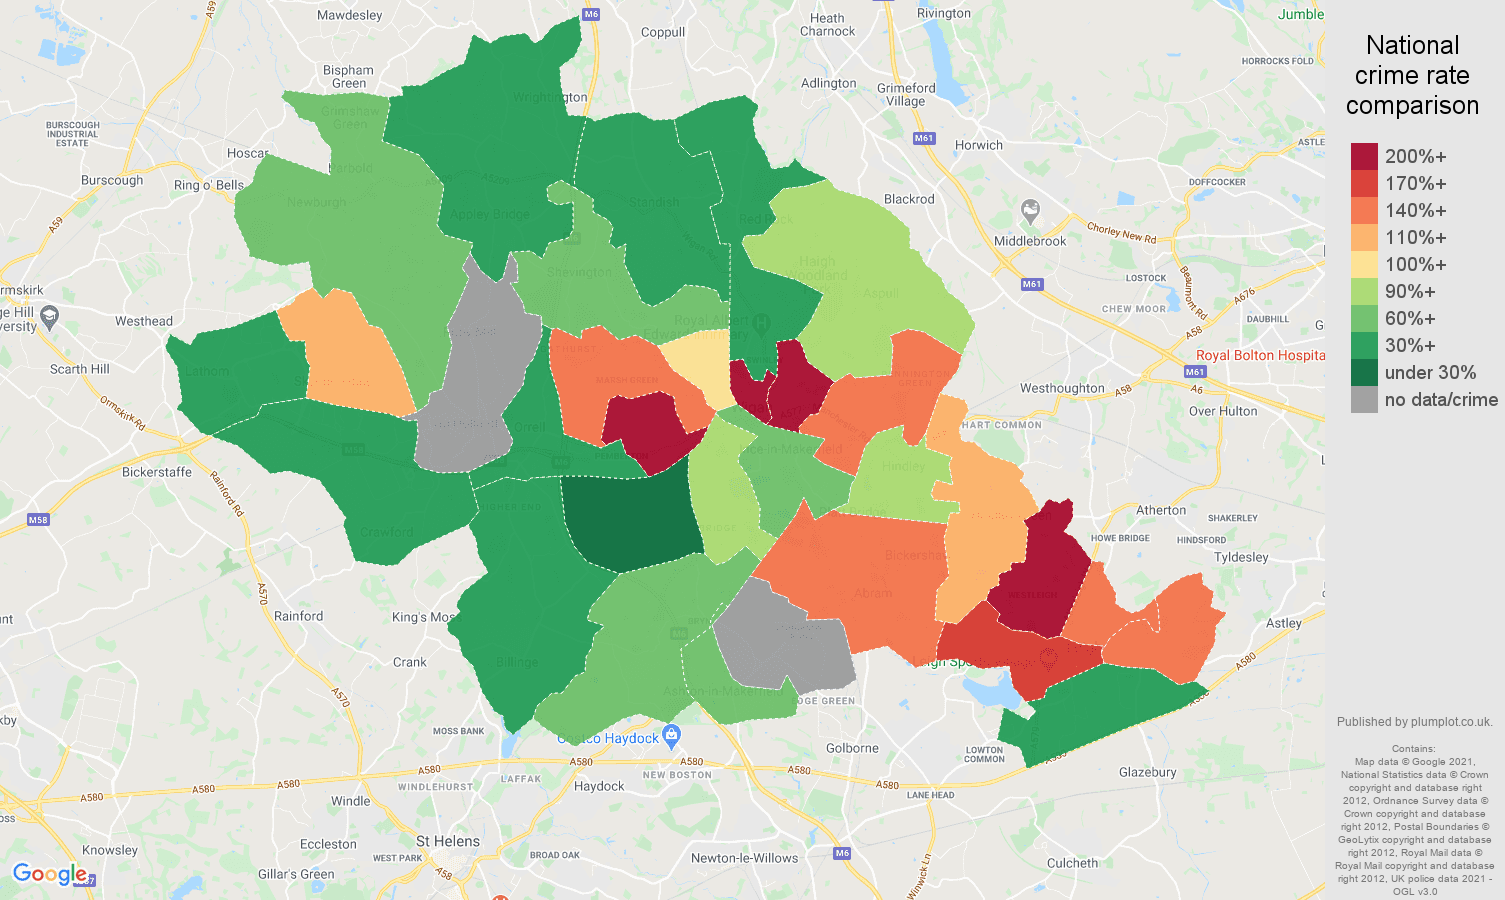 Wigan possession of weapons crime rate comparison map